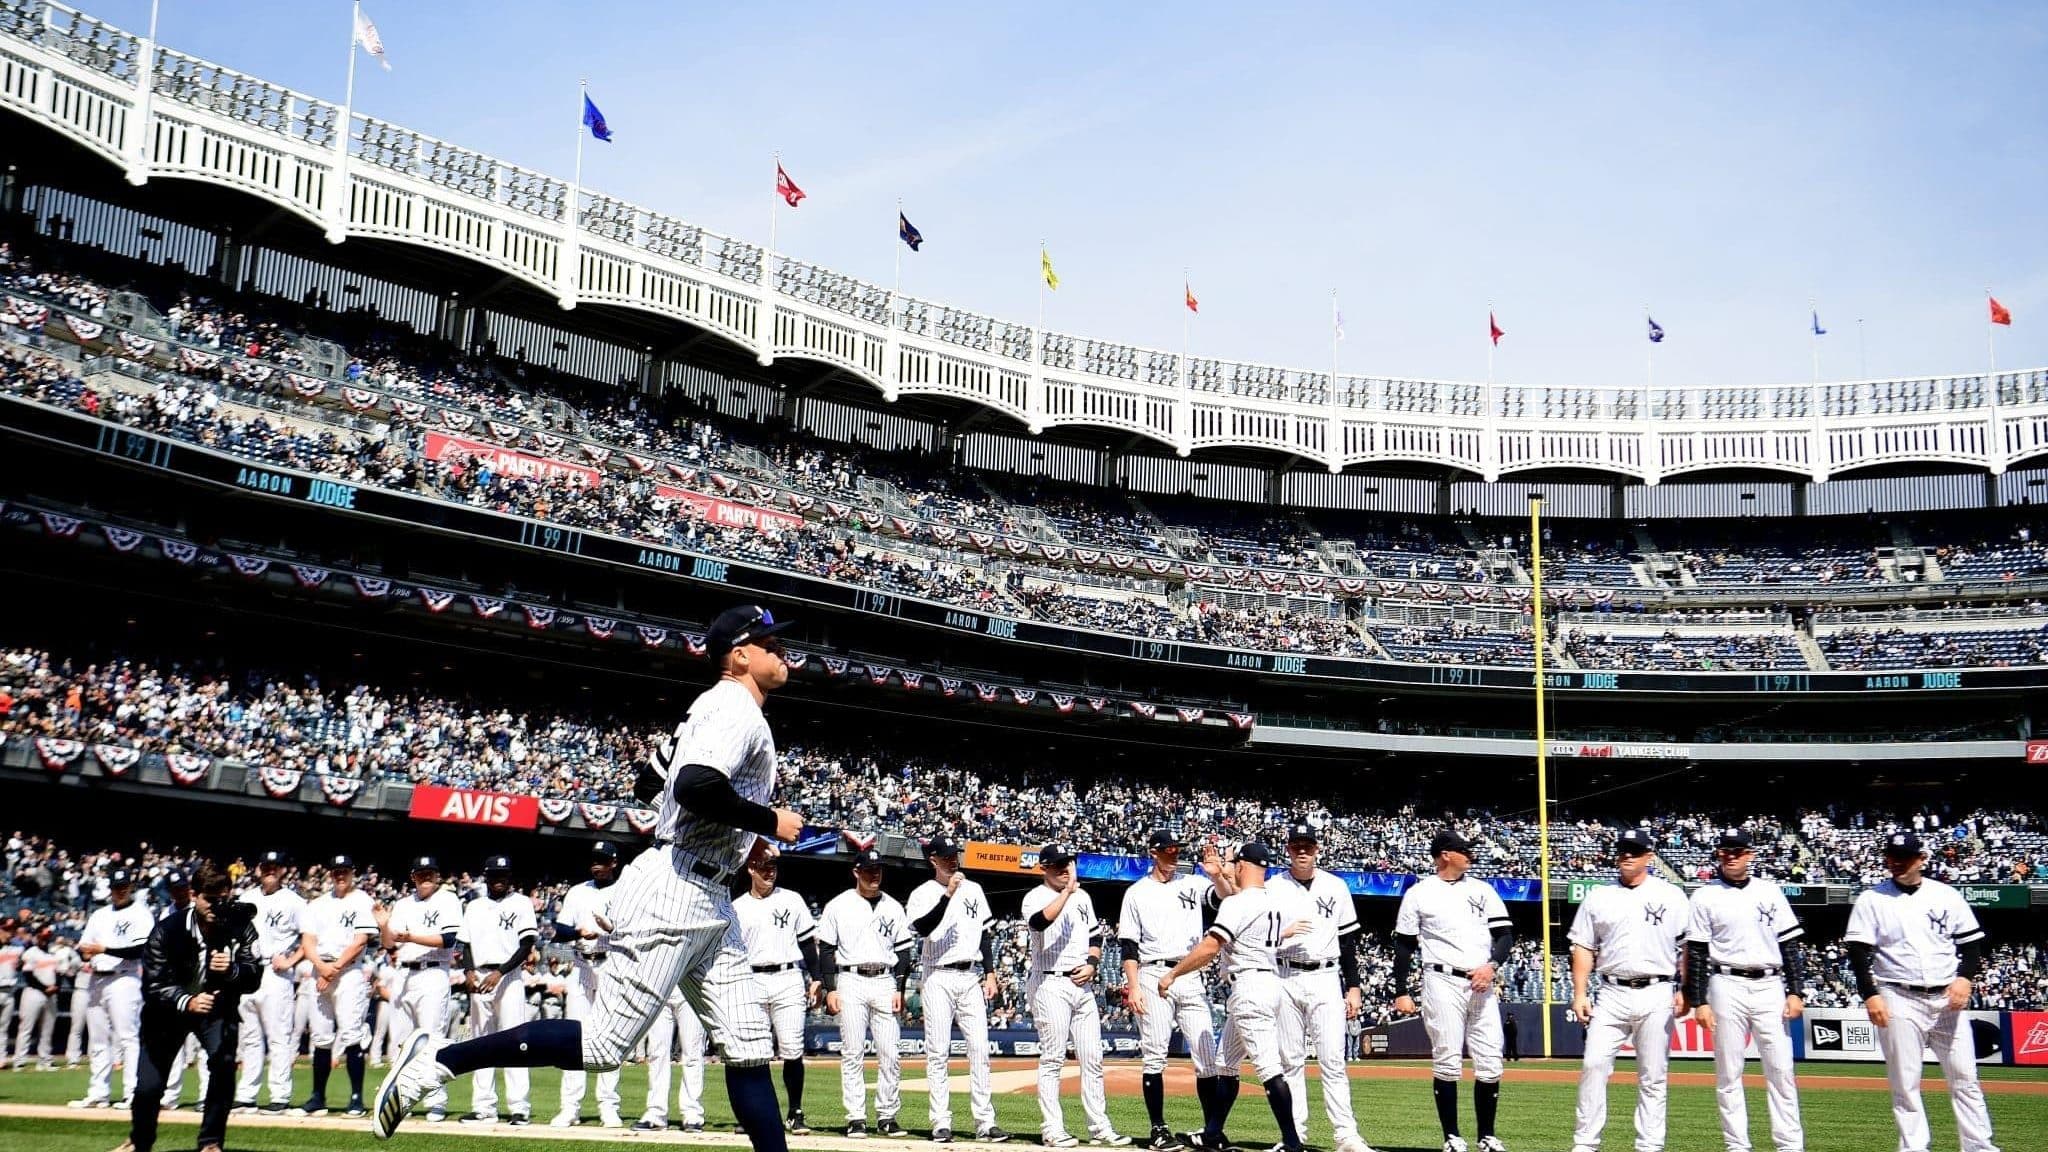 NEW YORK, NEW YORK - MARCH 28: Aaron Judge #99 of the New York Yankees takes the field before the game against the Baltimore Orioles on Opening Day at Yankee Stadium on March 28, 2019 in the Bronx borough of New York City.